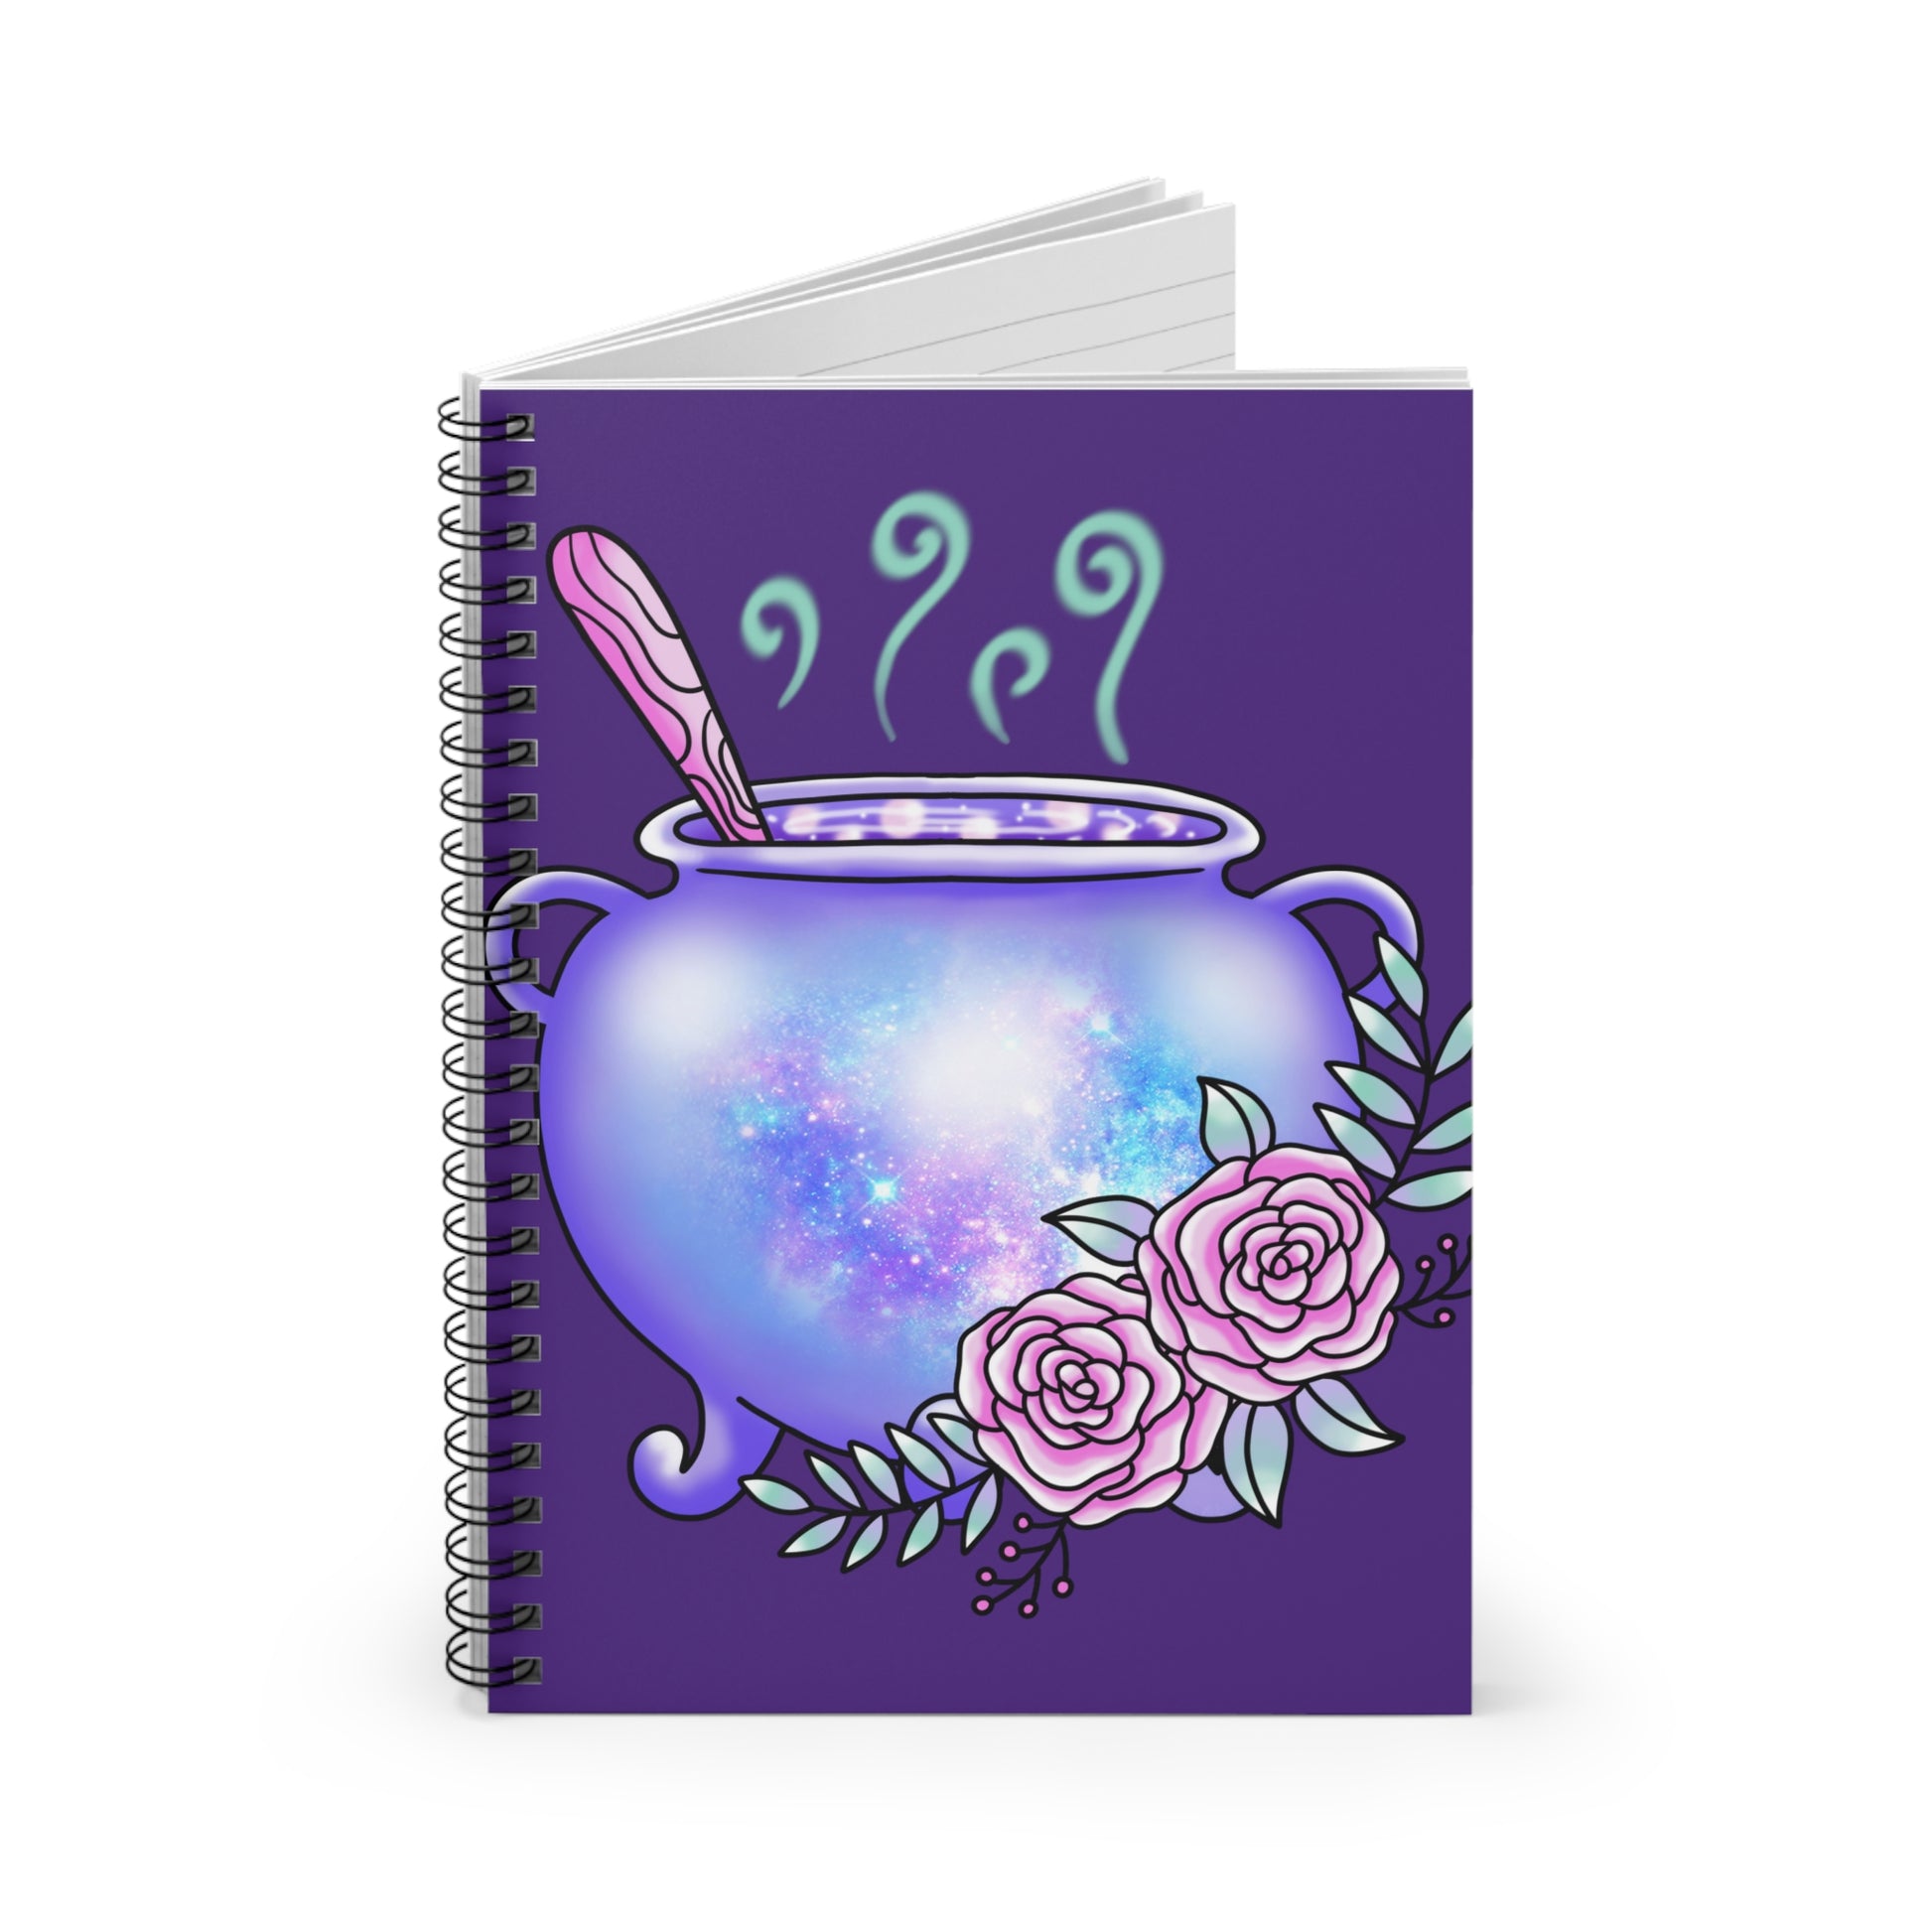 Cauldron Brew - I Love You: Spiral Notebook - Log Books - Journals - Diaries - and More Custom Printed by TheGlassyLass